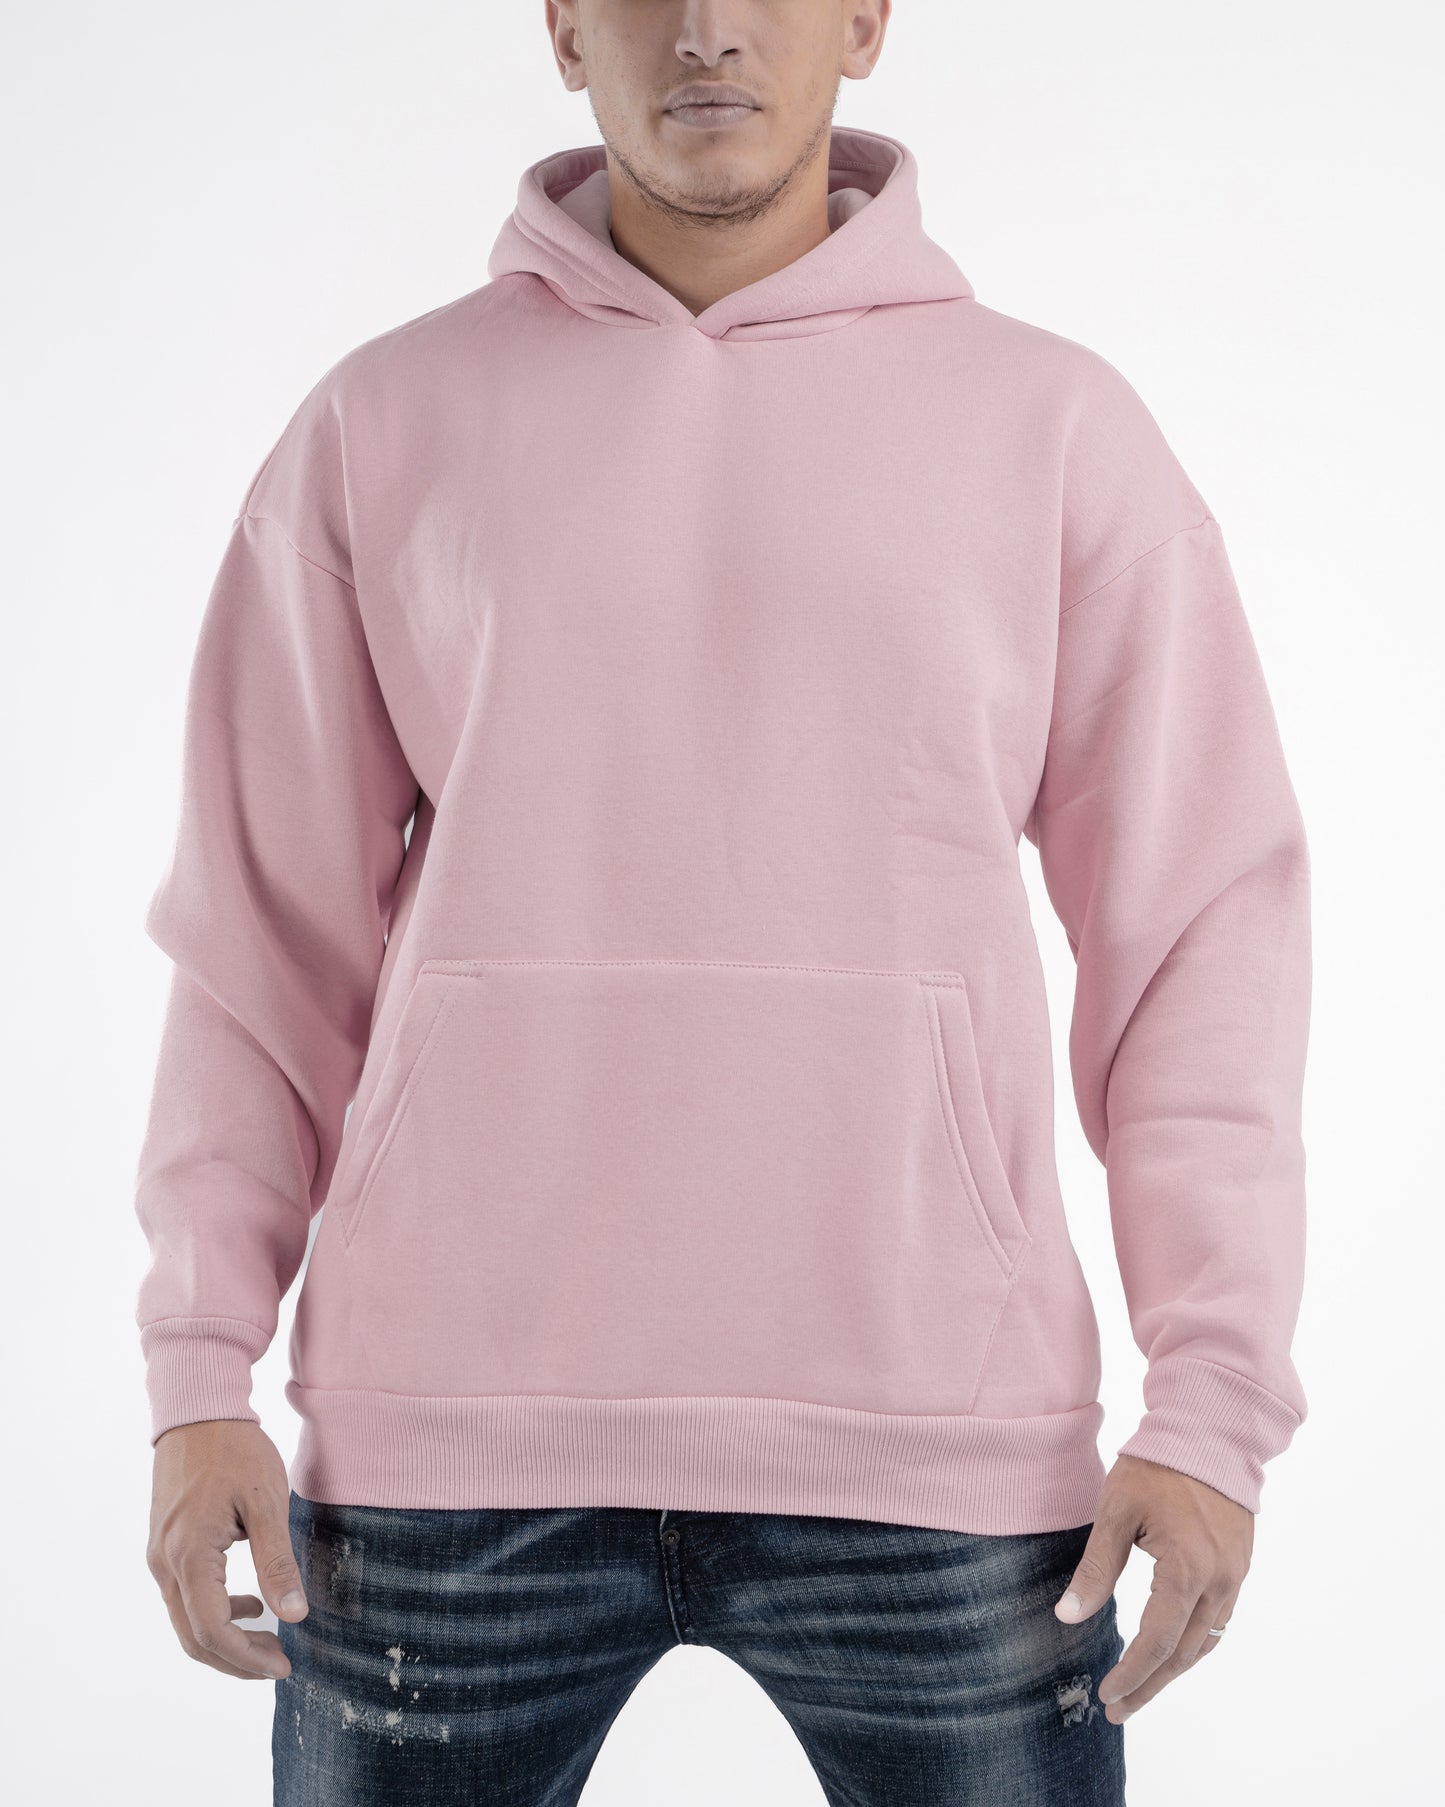 LIGHT PINK OVER-SIZED HOODIE